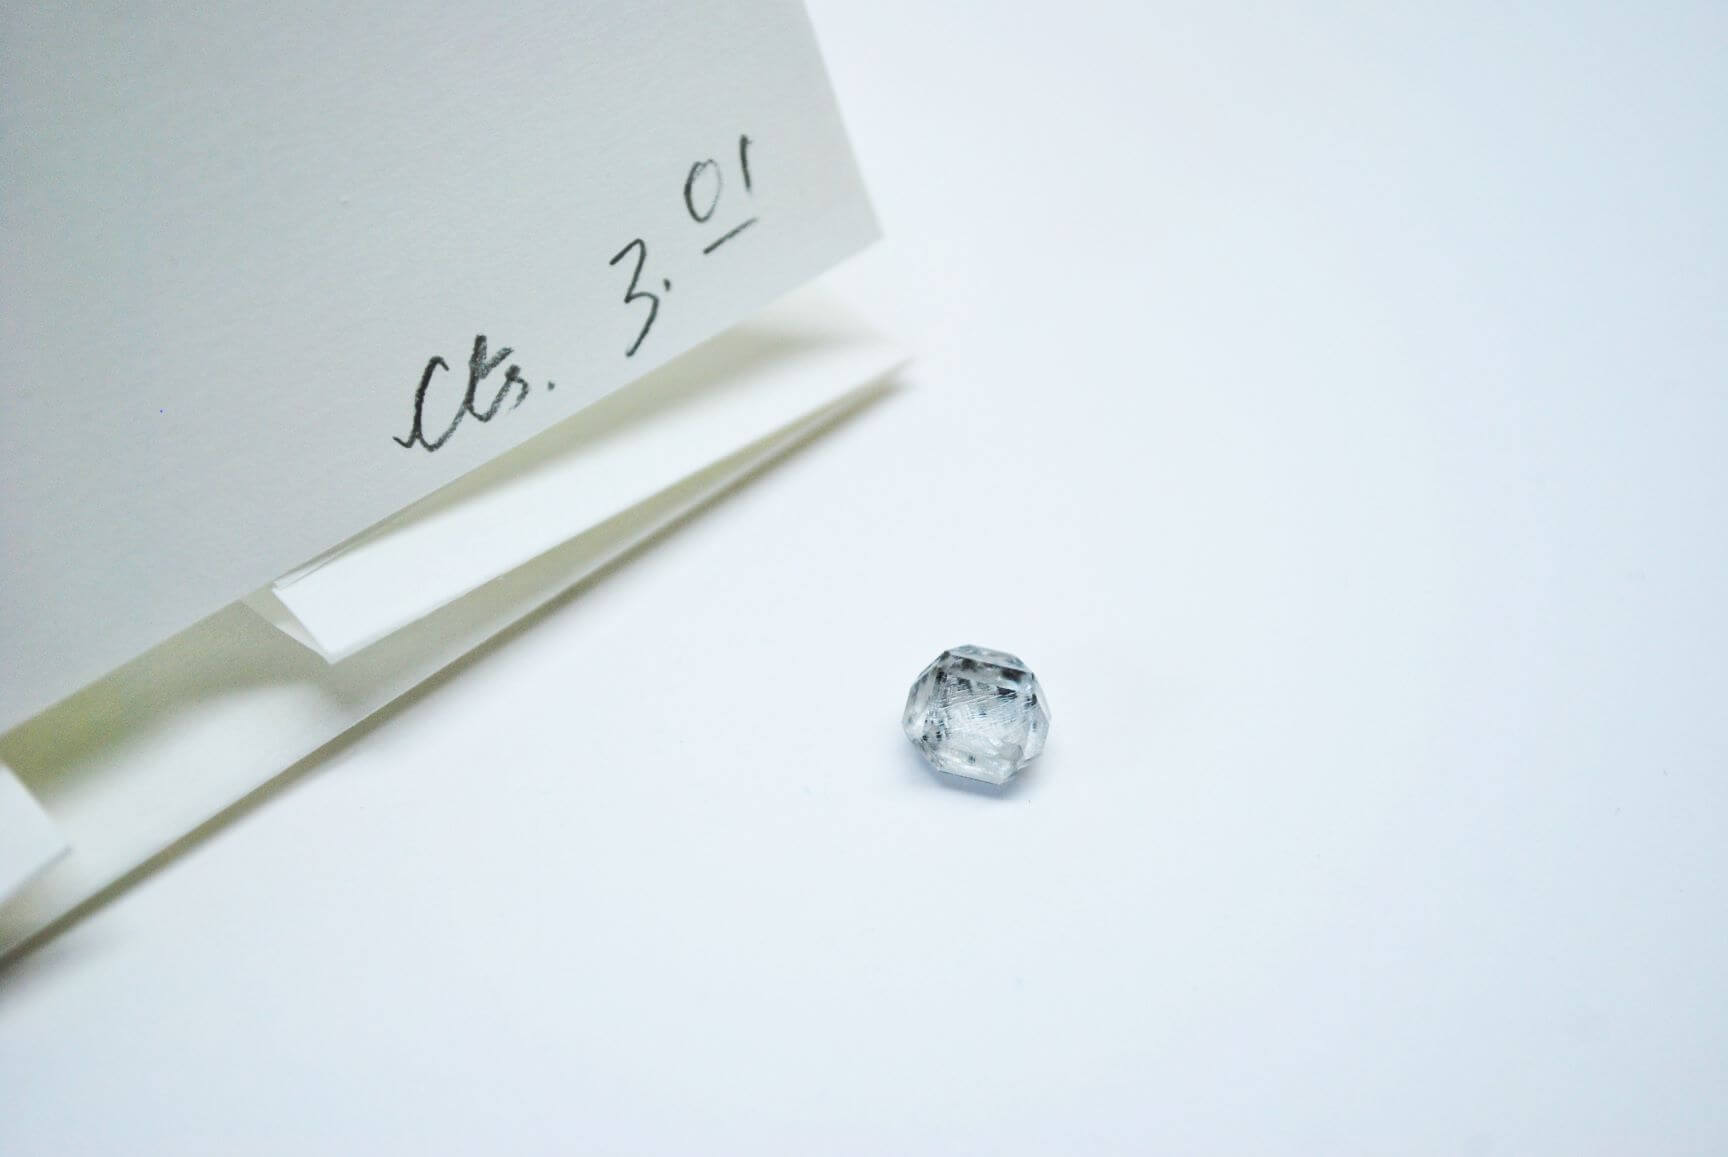 CVD HPHT lab grown rough solitaire diamond with its parcel paper